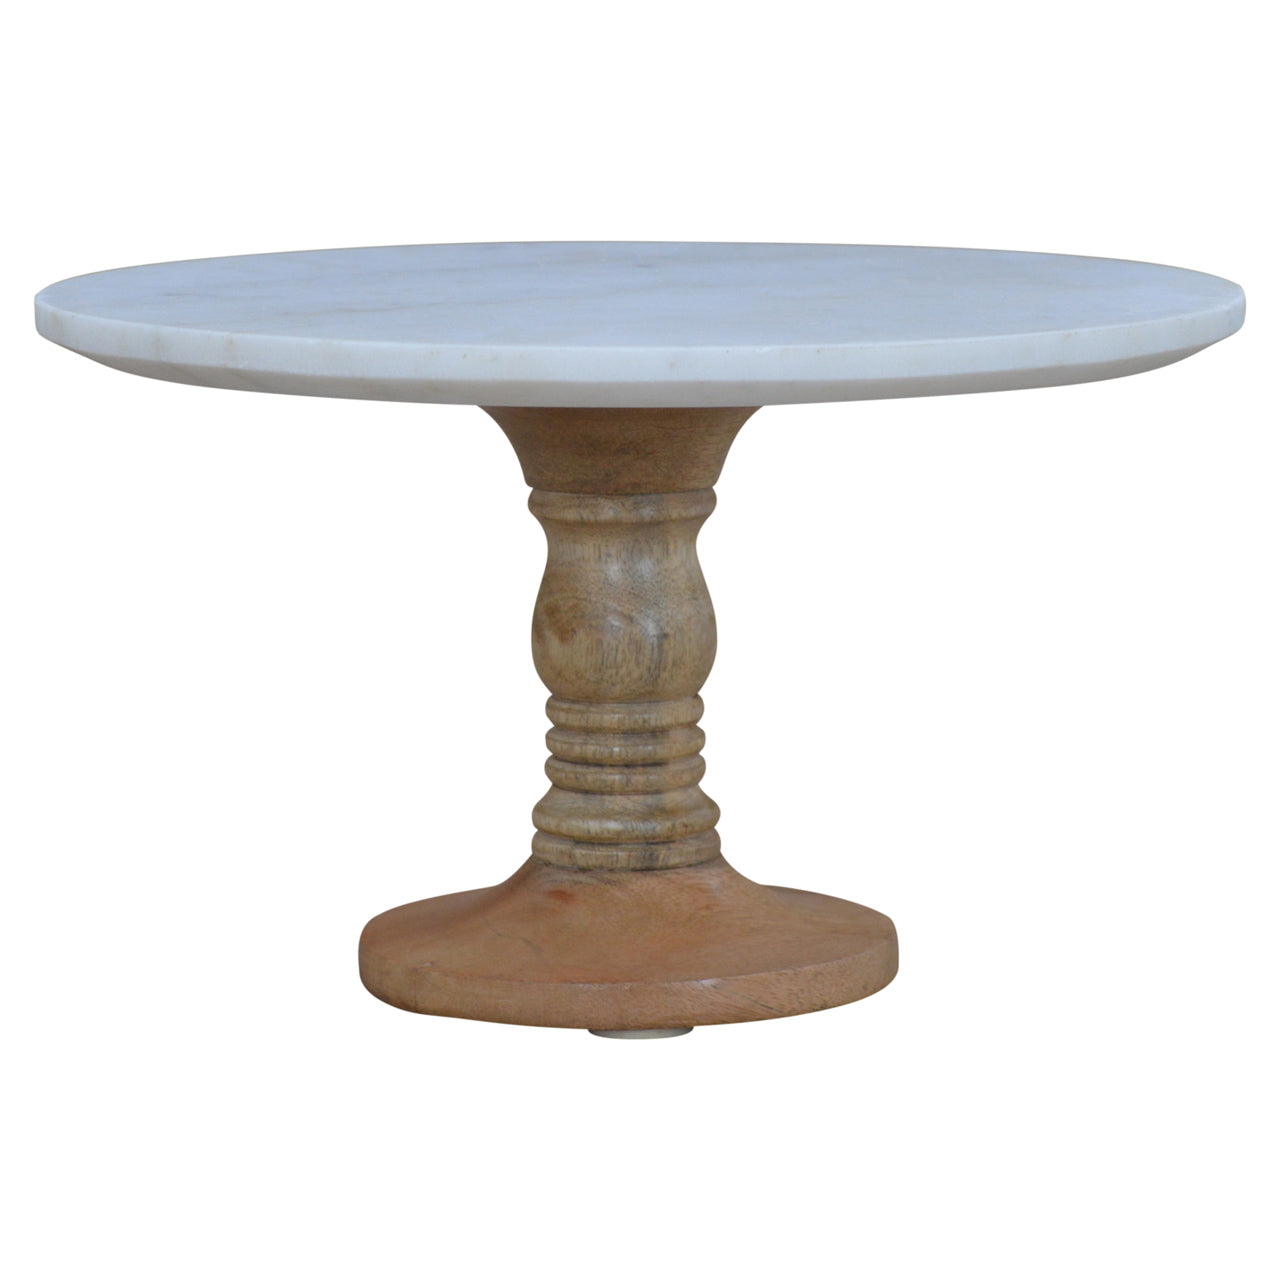 View Cake Stand with Marble Top information